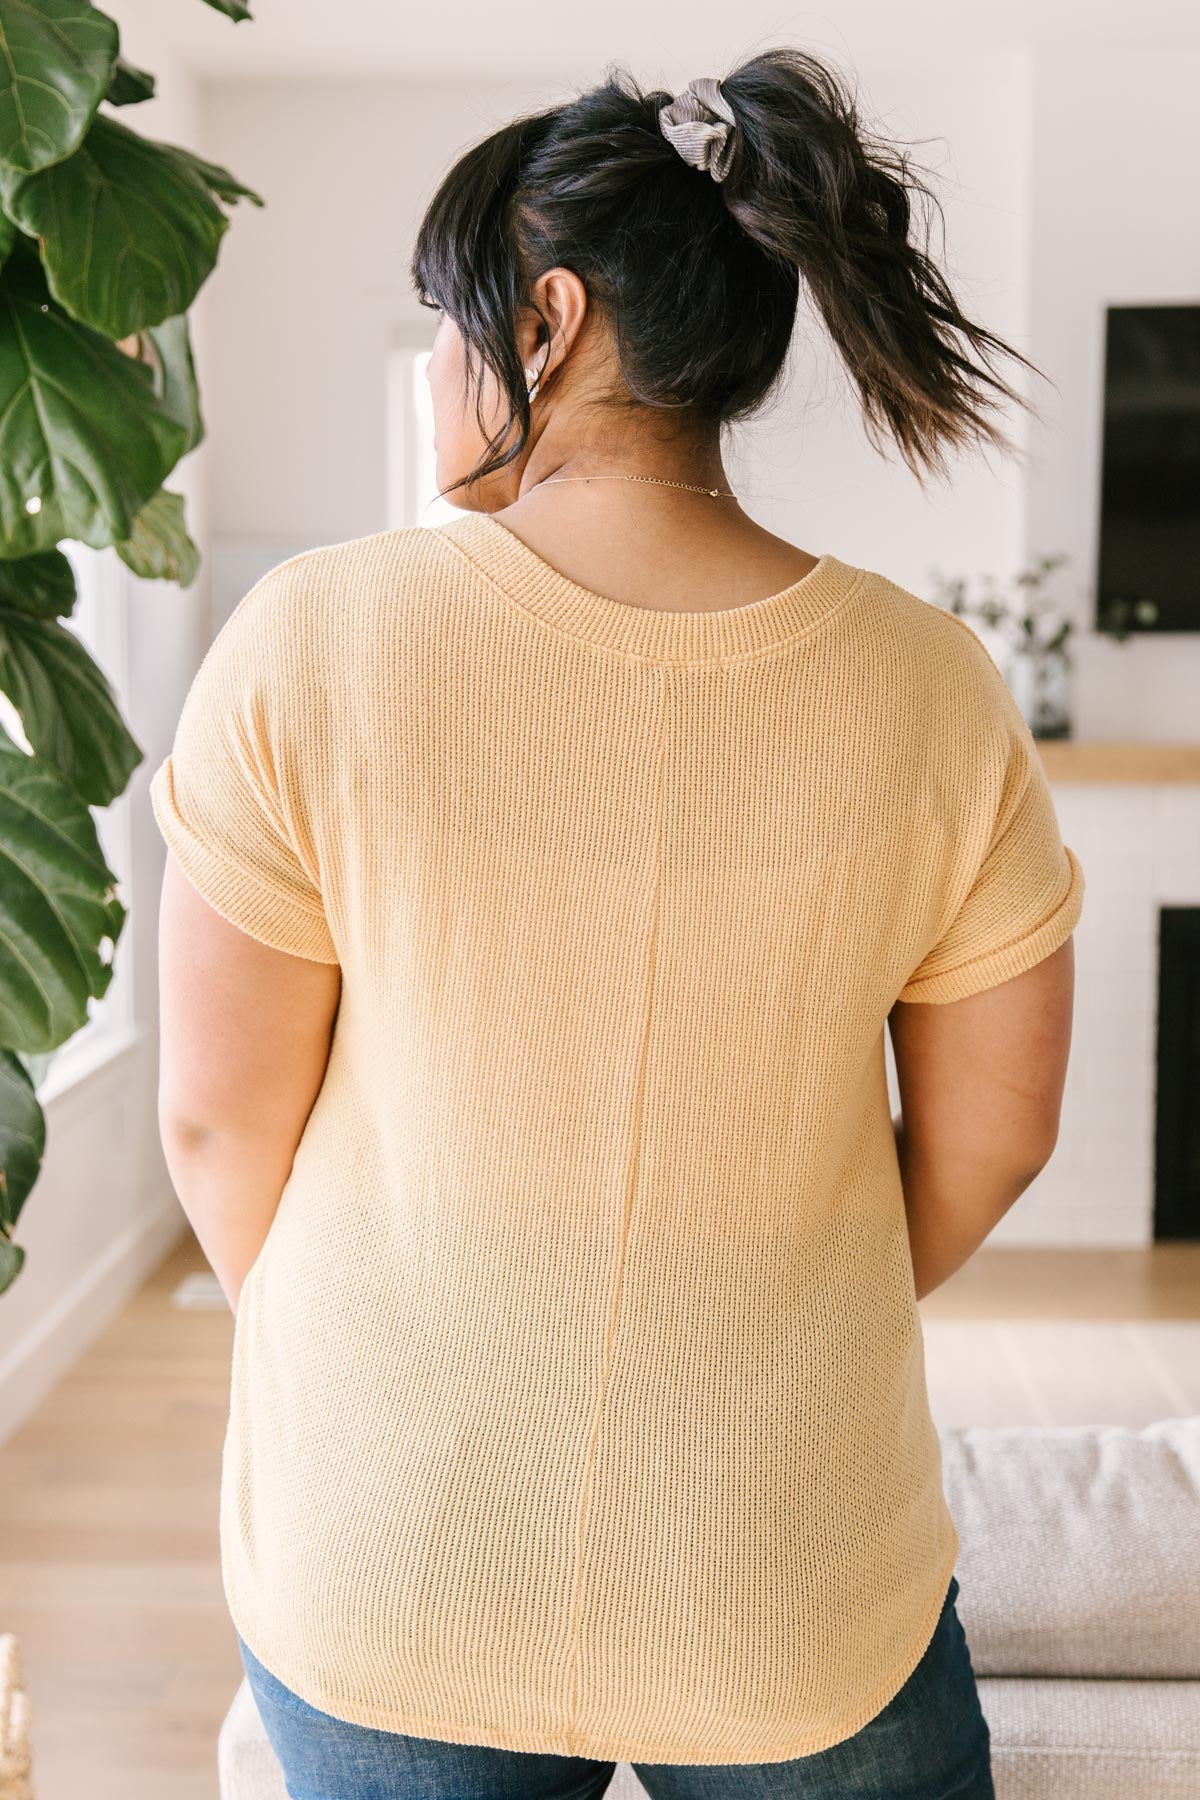 The Morning Bird Top in Pastel Yellow